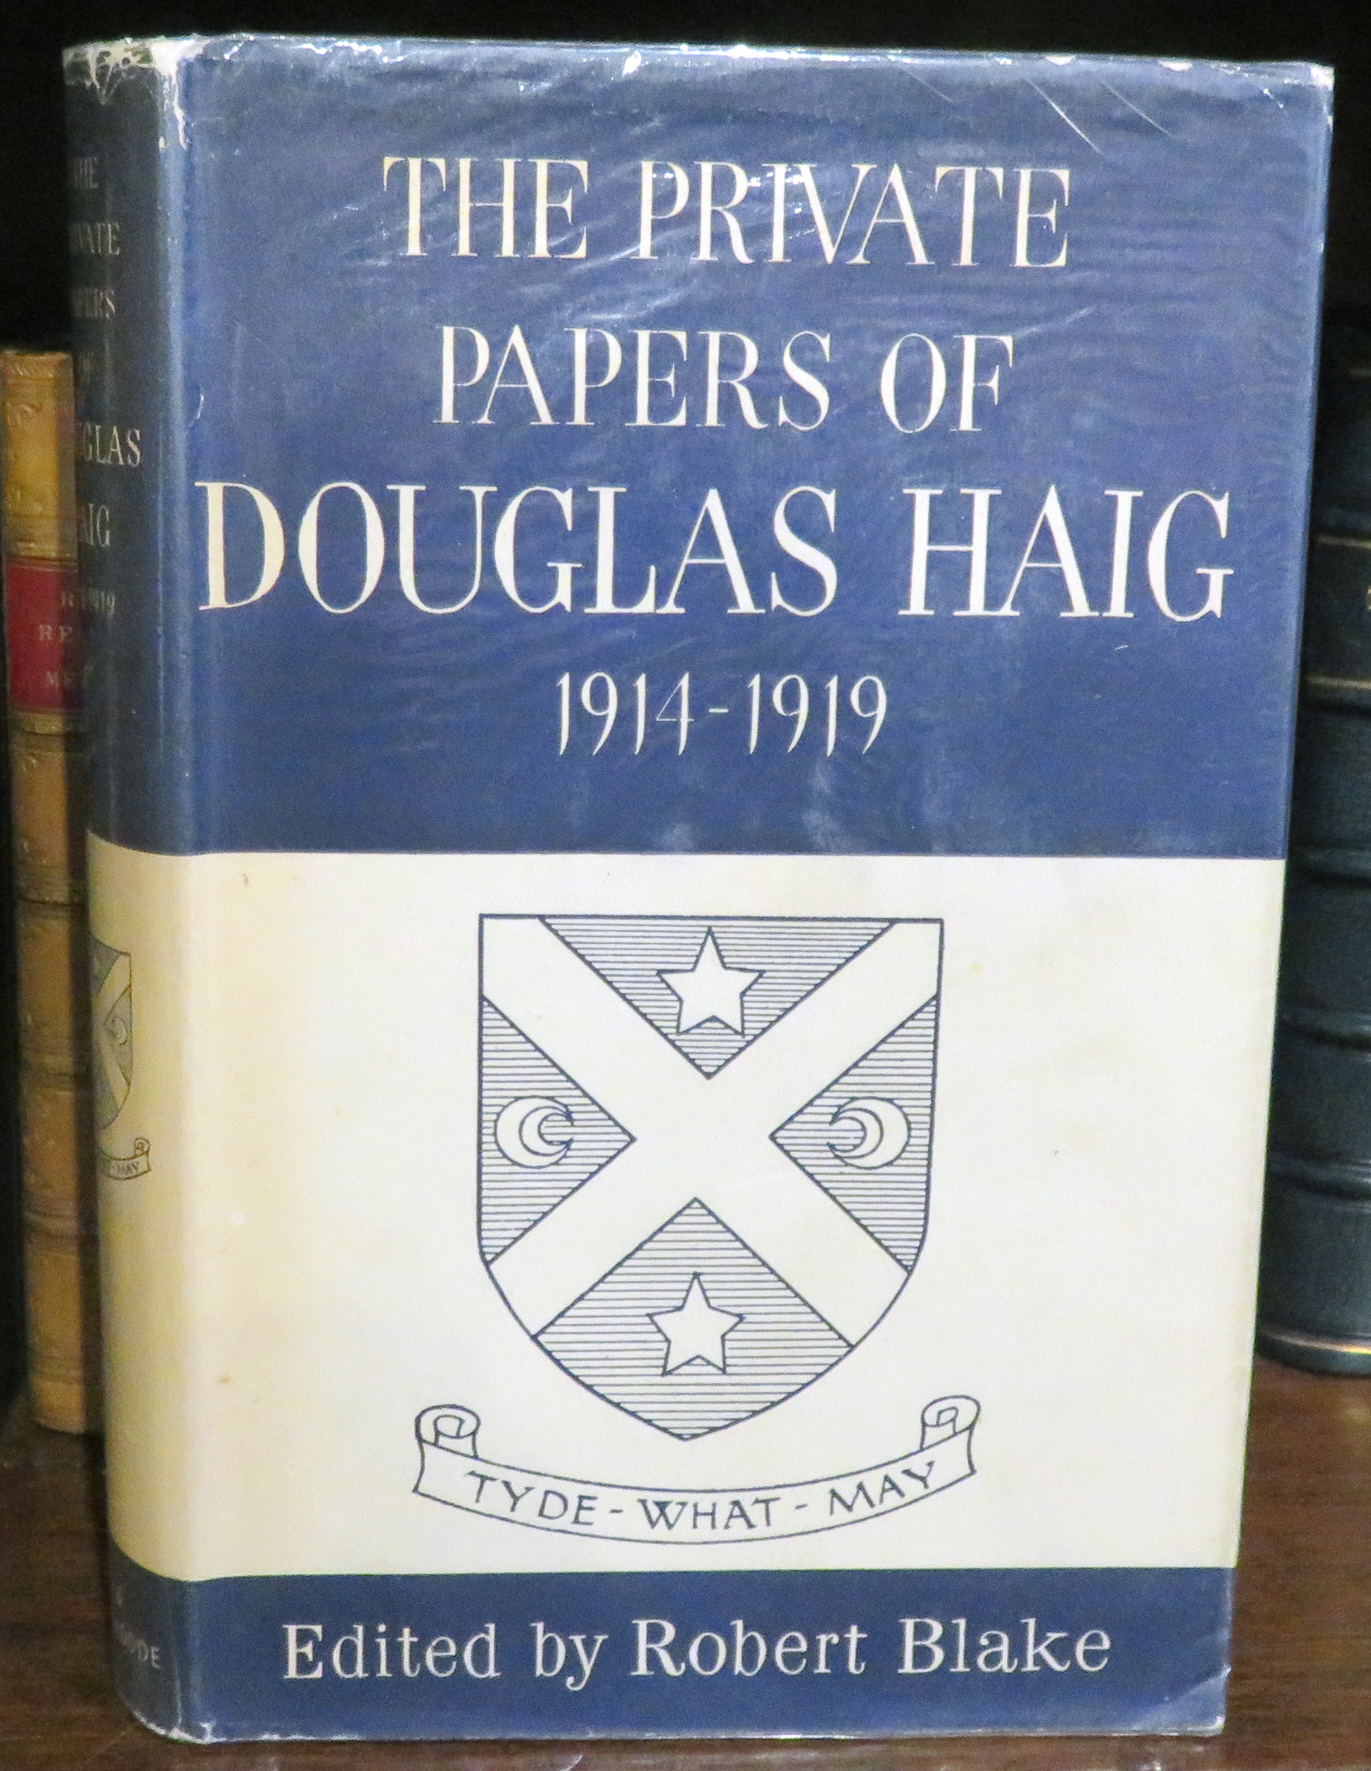 The Private Papers Of Douglas Haig 1914-1919